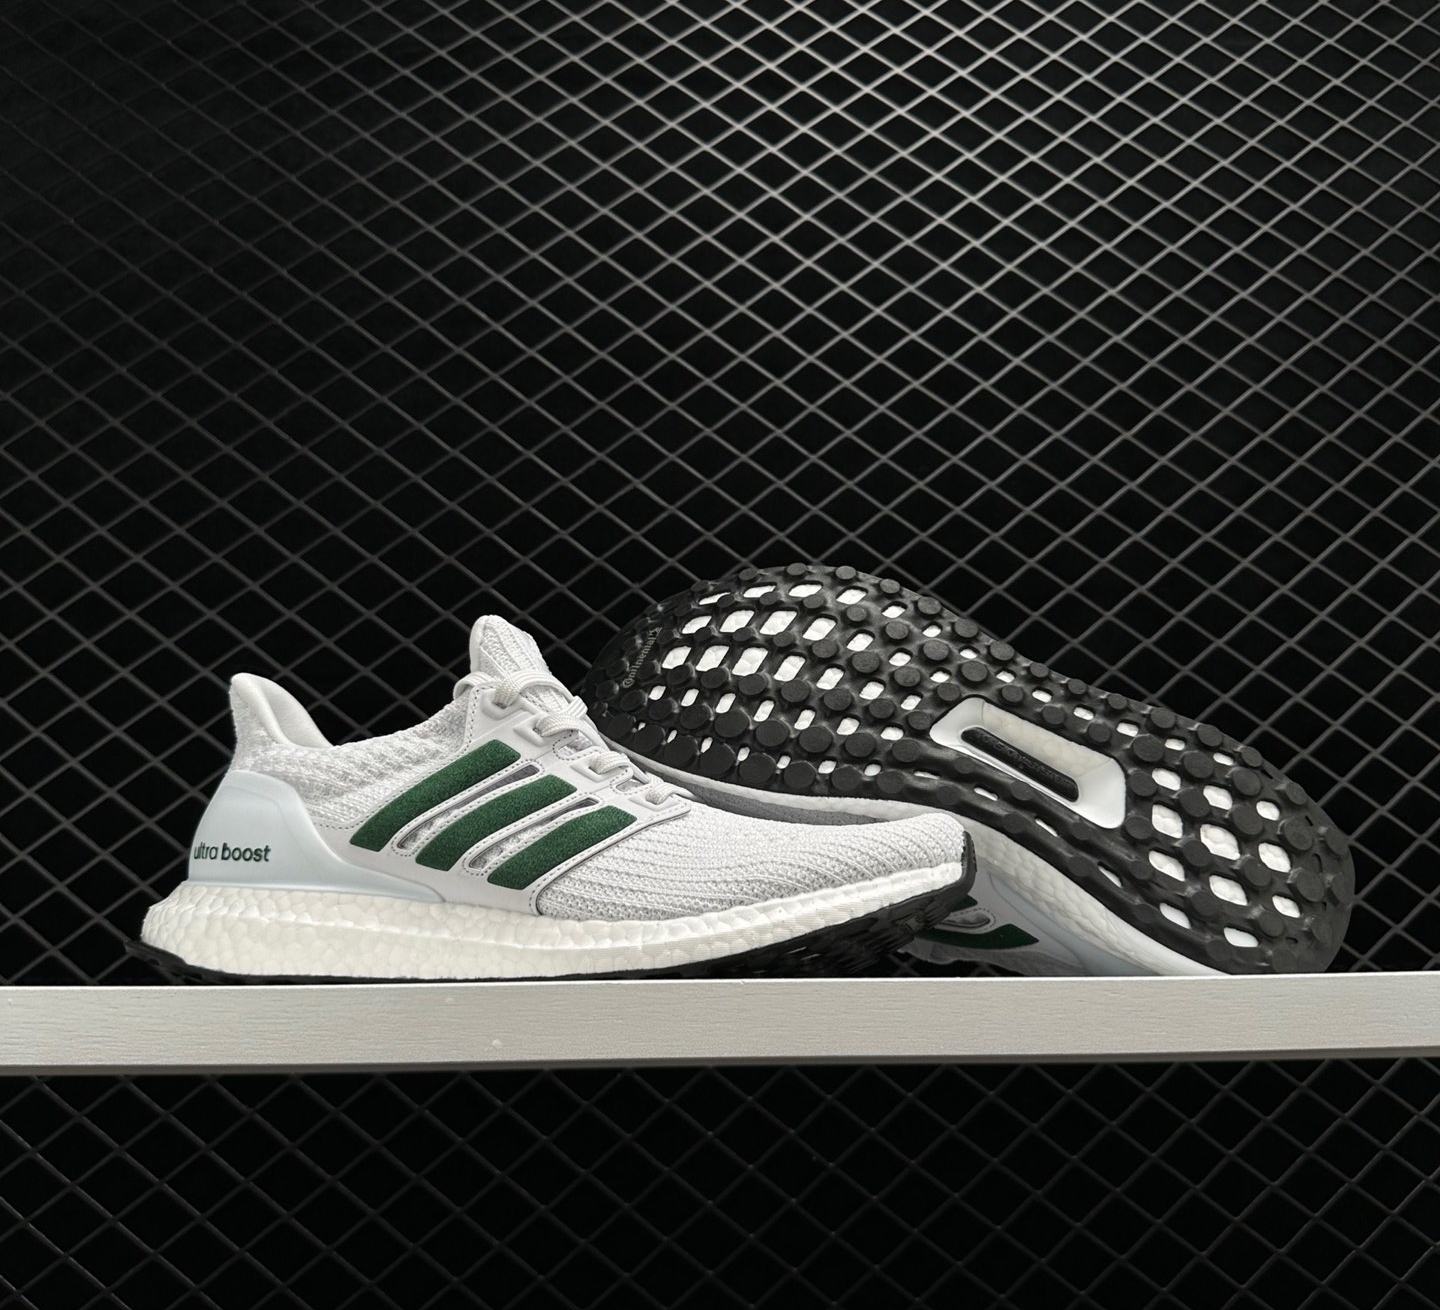 Adidas UltraBoost 4.0 DNA 'White Green' FY9338 - Stylish and Comfortable Footwear